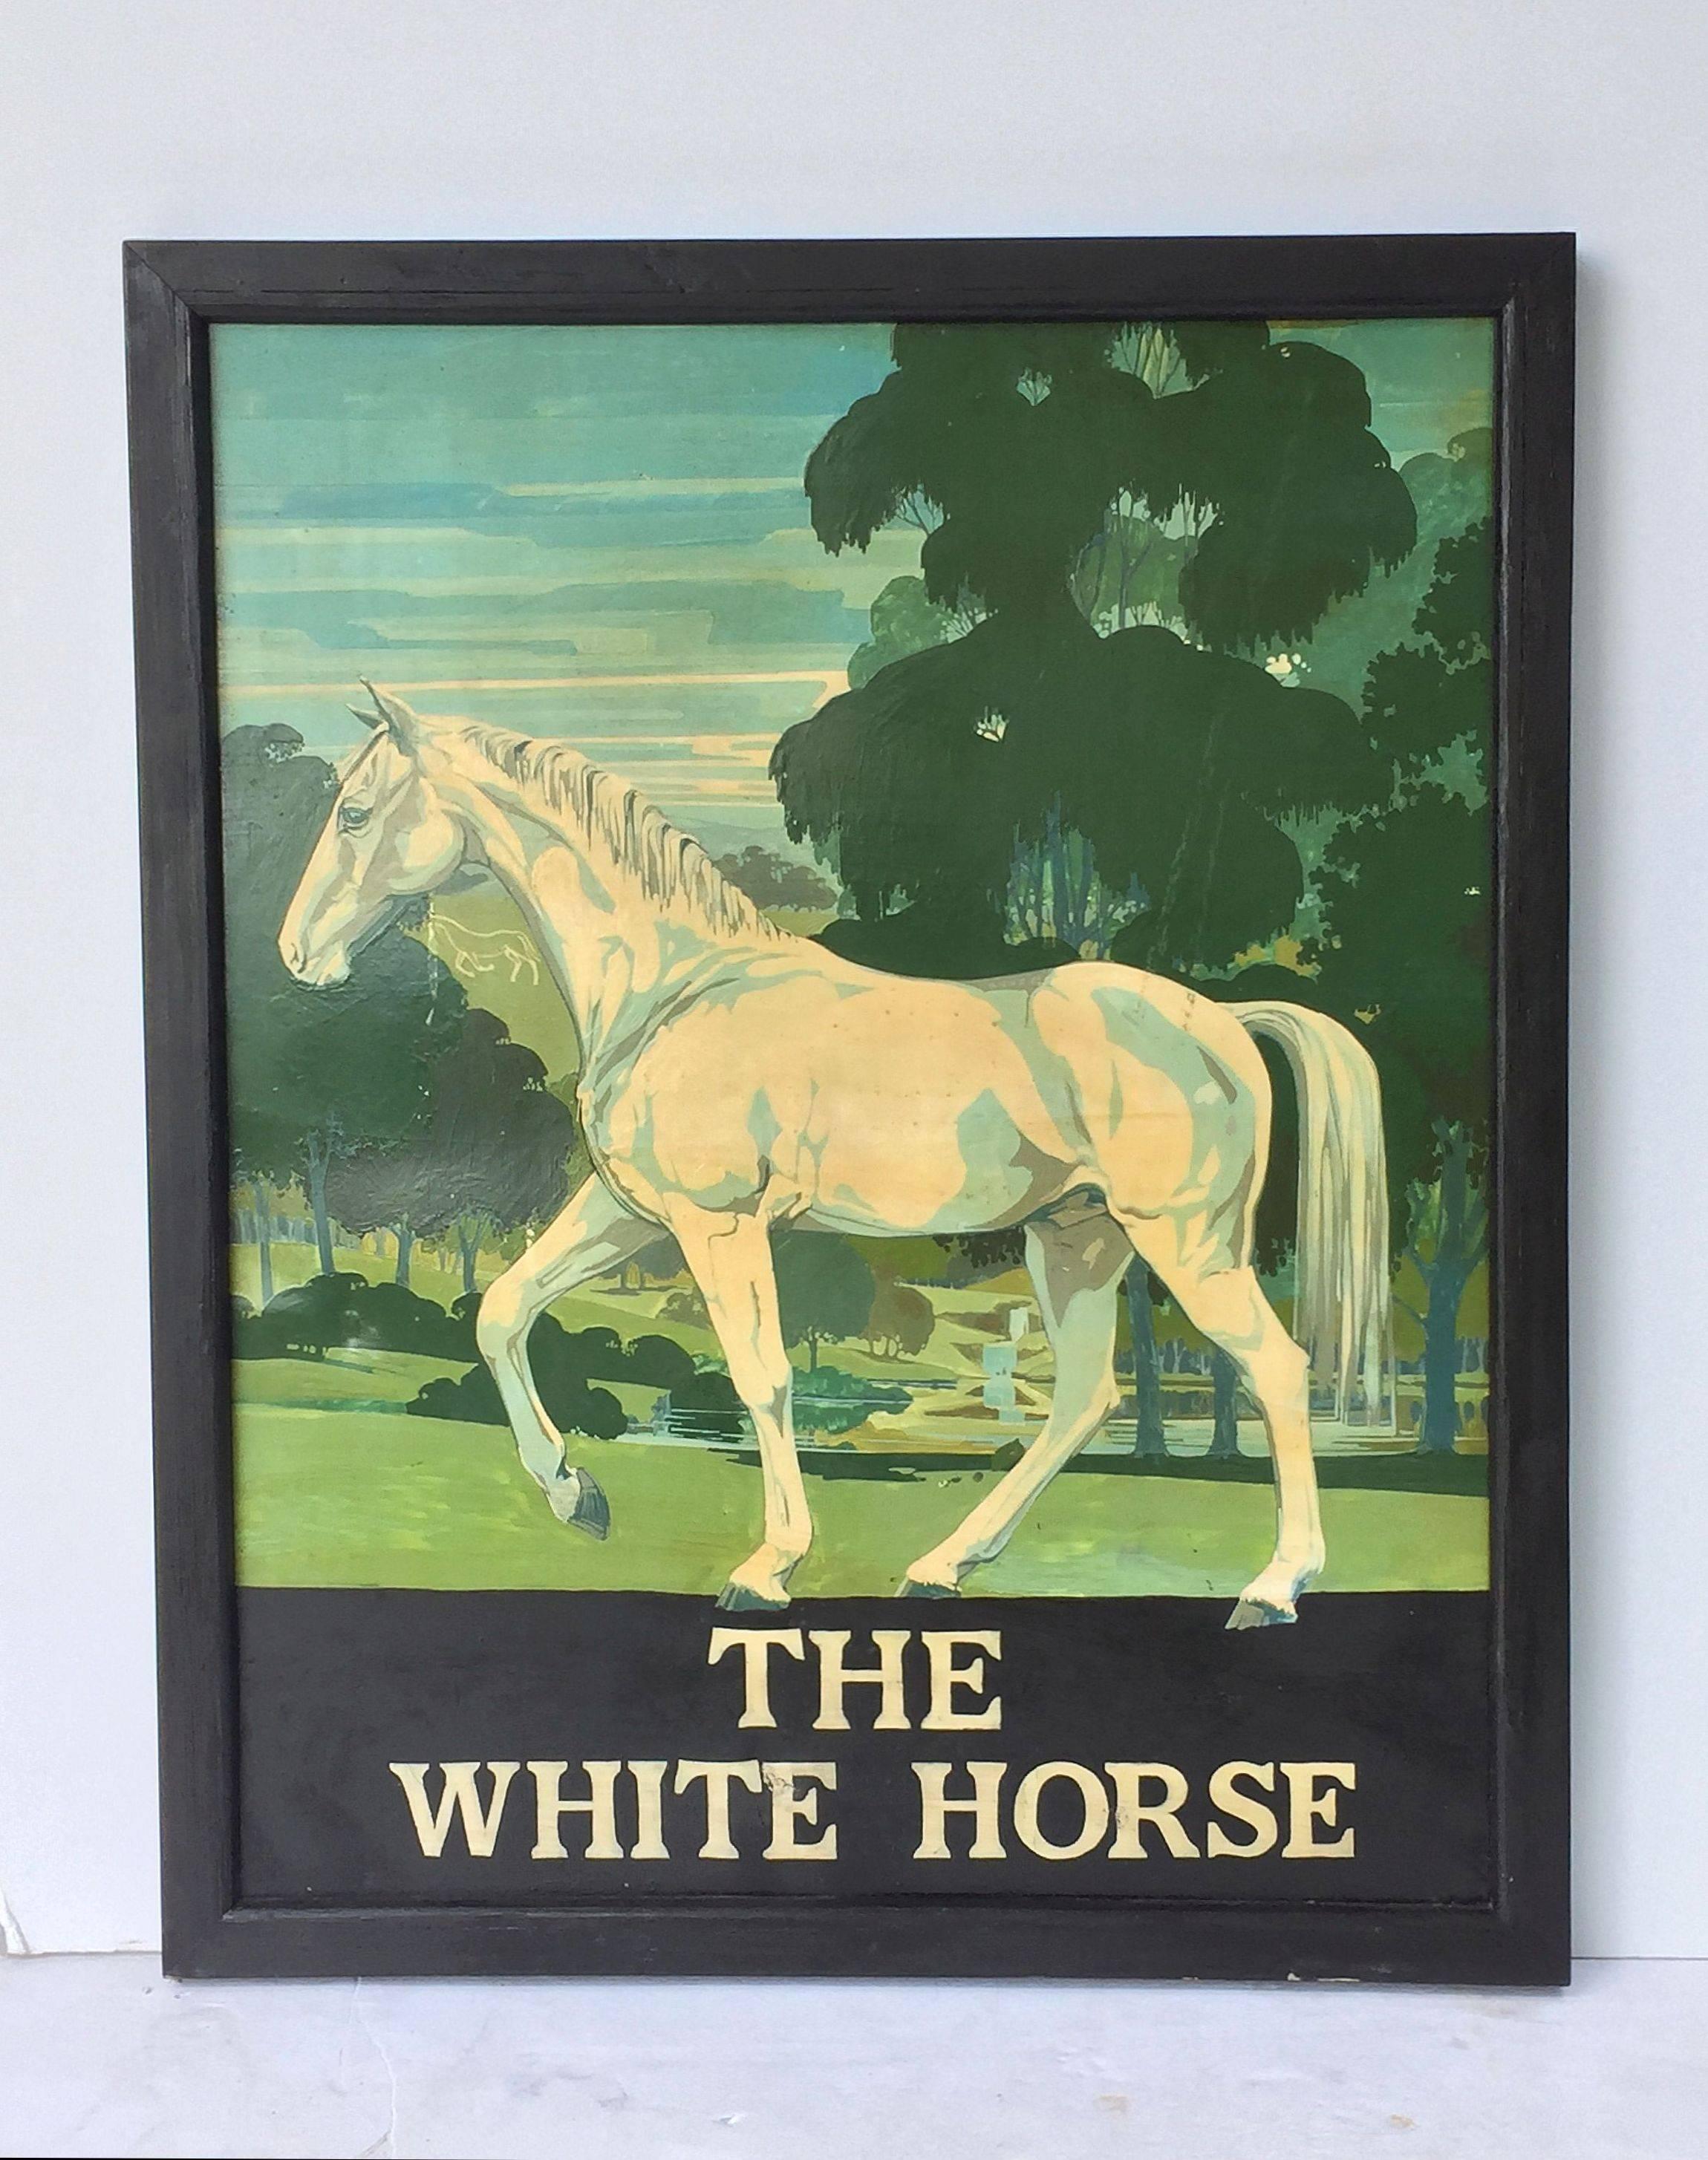 An authentic English pub sign (one-sided) featuring a painting of a white horse, with trees in the background, entitled: The White Horse

A very fine example of vintage advertising artwork, ready for display.
 